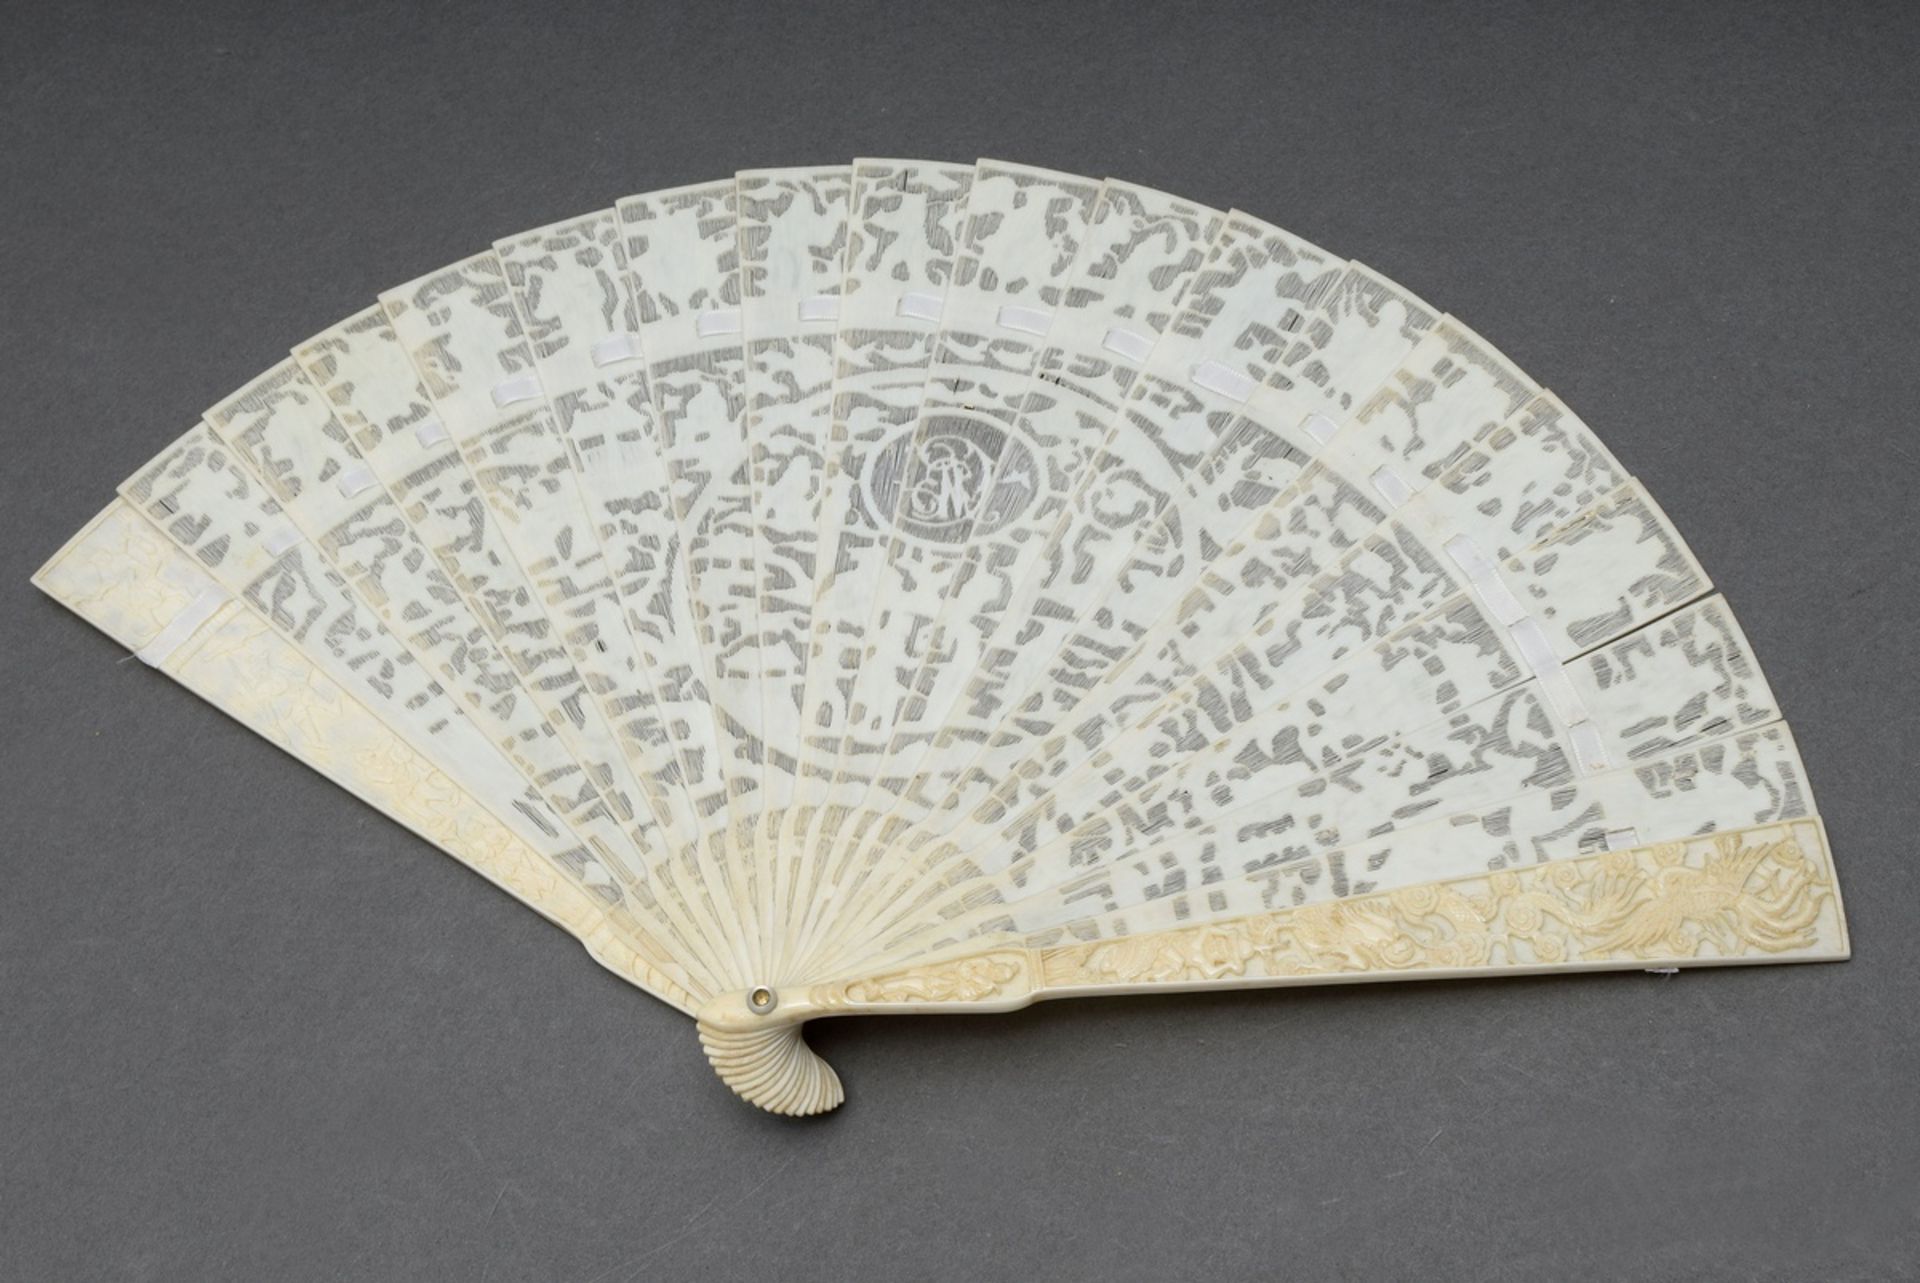 Ivory brisée fan with finest carvings "Chinese genre scenes" and central monogram "MB", Canton end  - Image 2 of 8